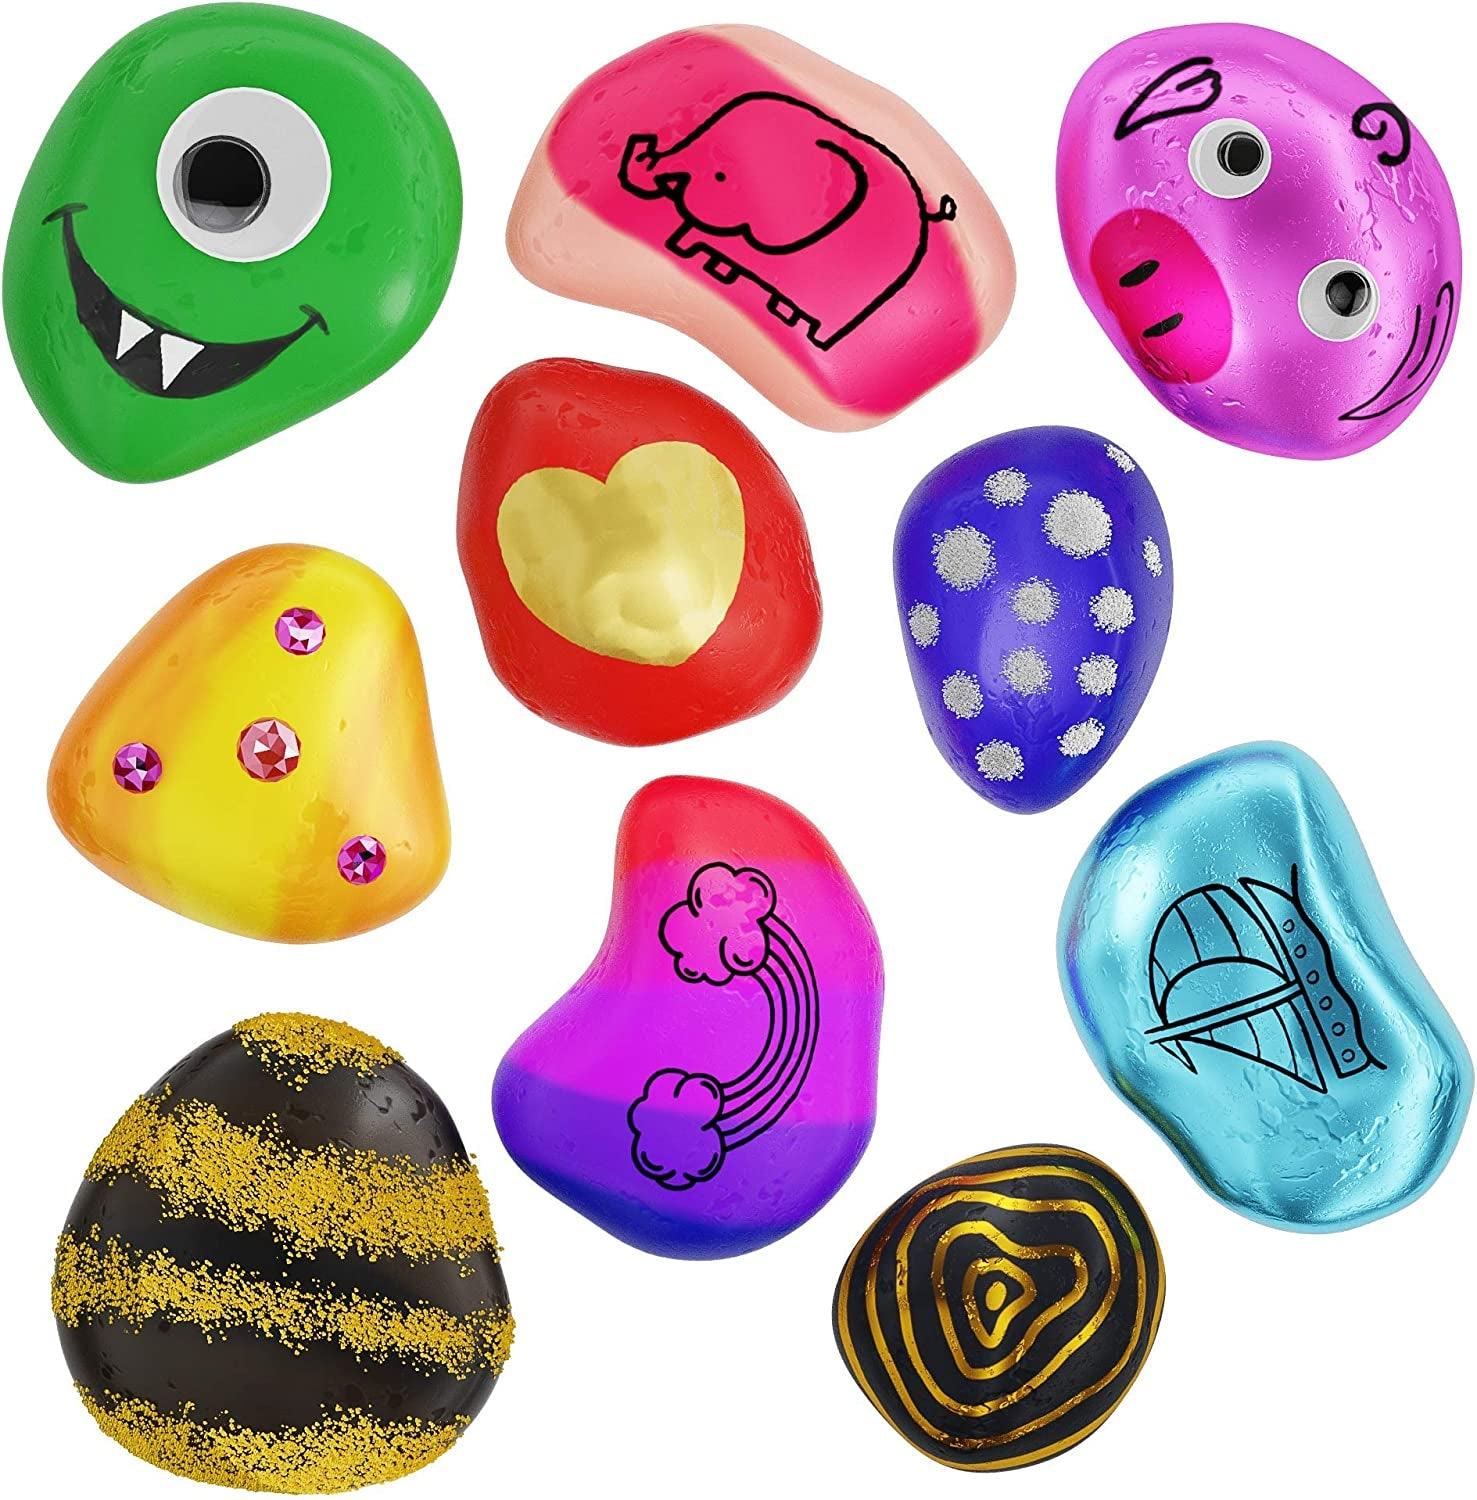 Rock Painting Kit for Kids - Arts and Crafts for Girls & Boys Ages 6-12 - Craft Kits Art Set - WoodArtSupply